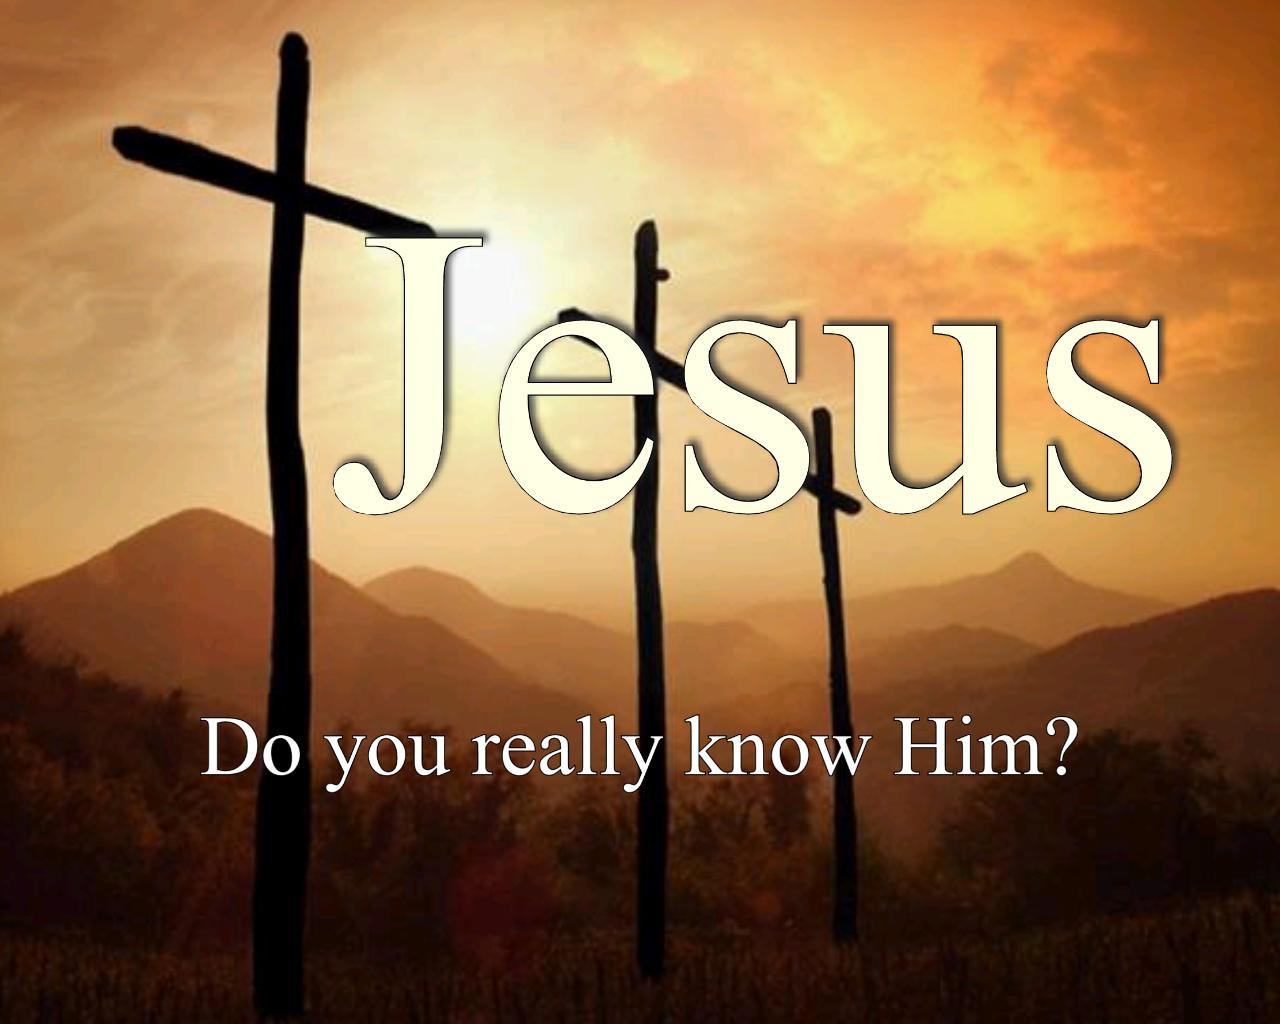 Yes Do You Really Know Him What Make Of His Suffering So That